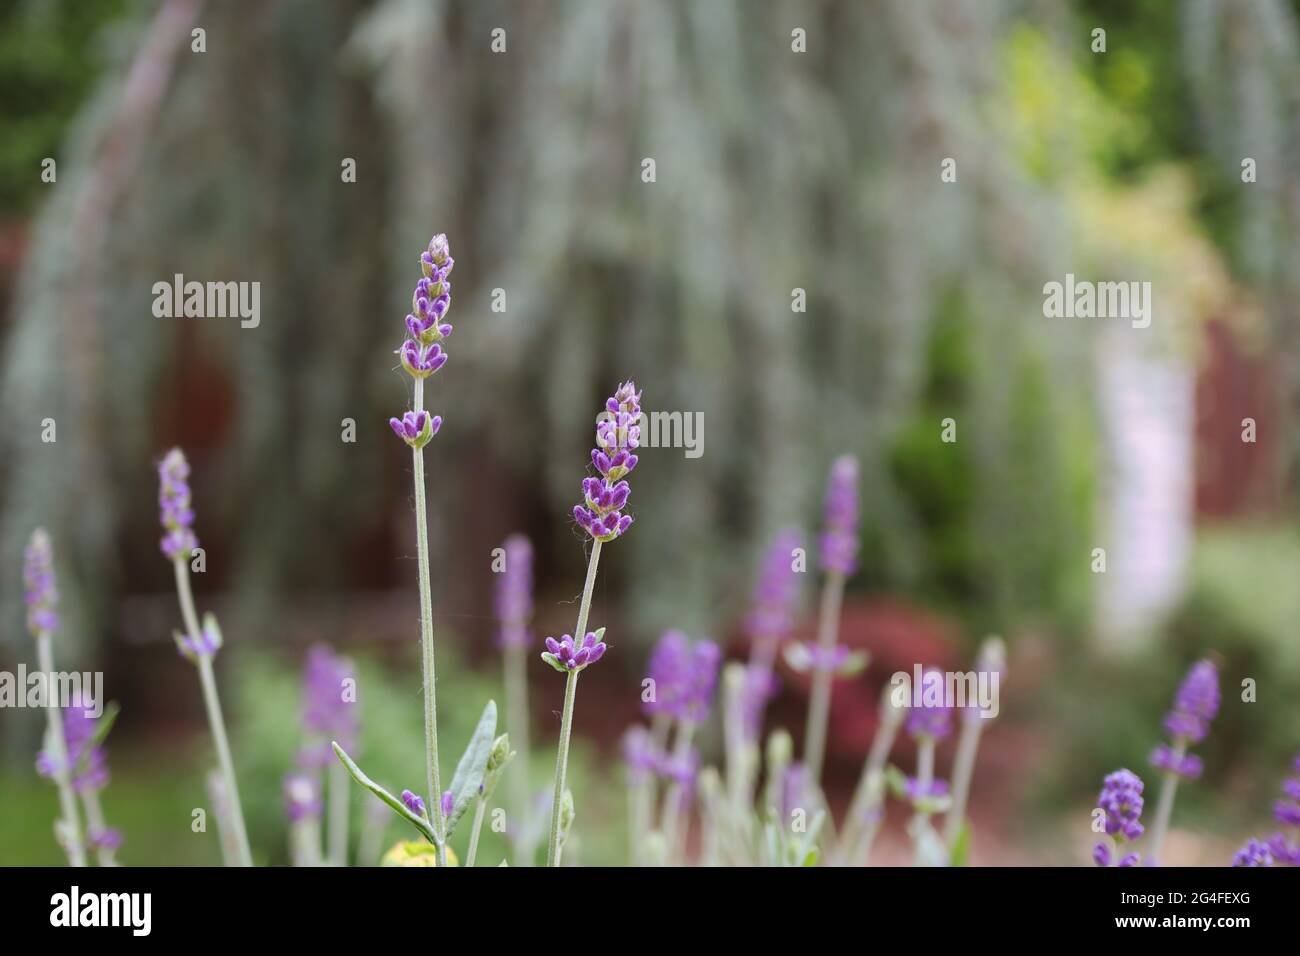 Growing Young Lavender in the Garden. Purple Flowering Plant Lavandula Outside. Stock Photo